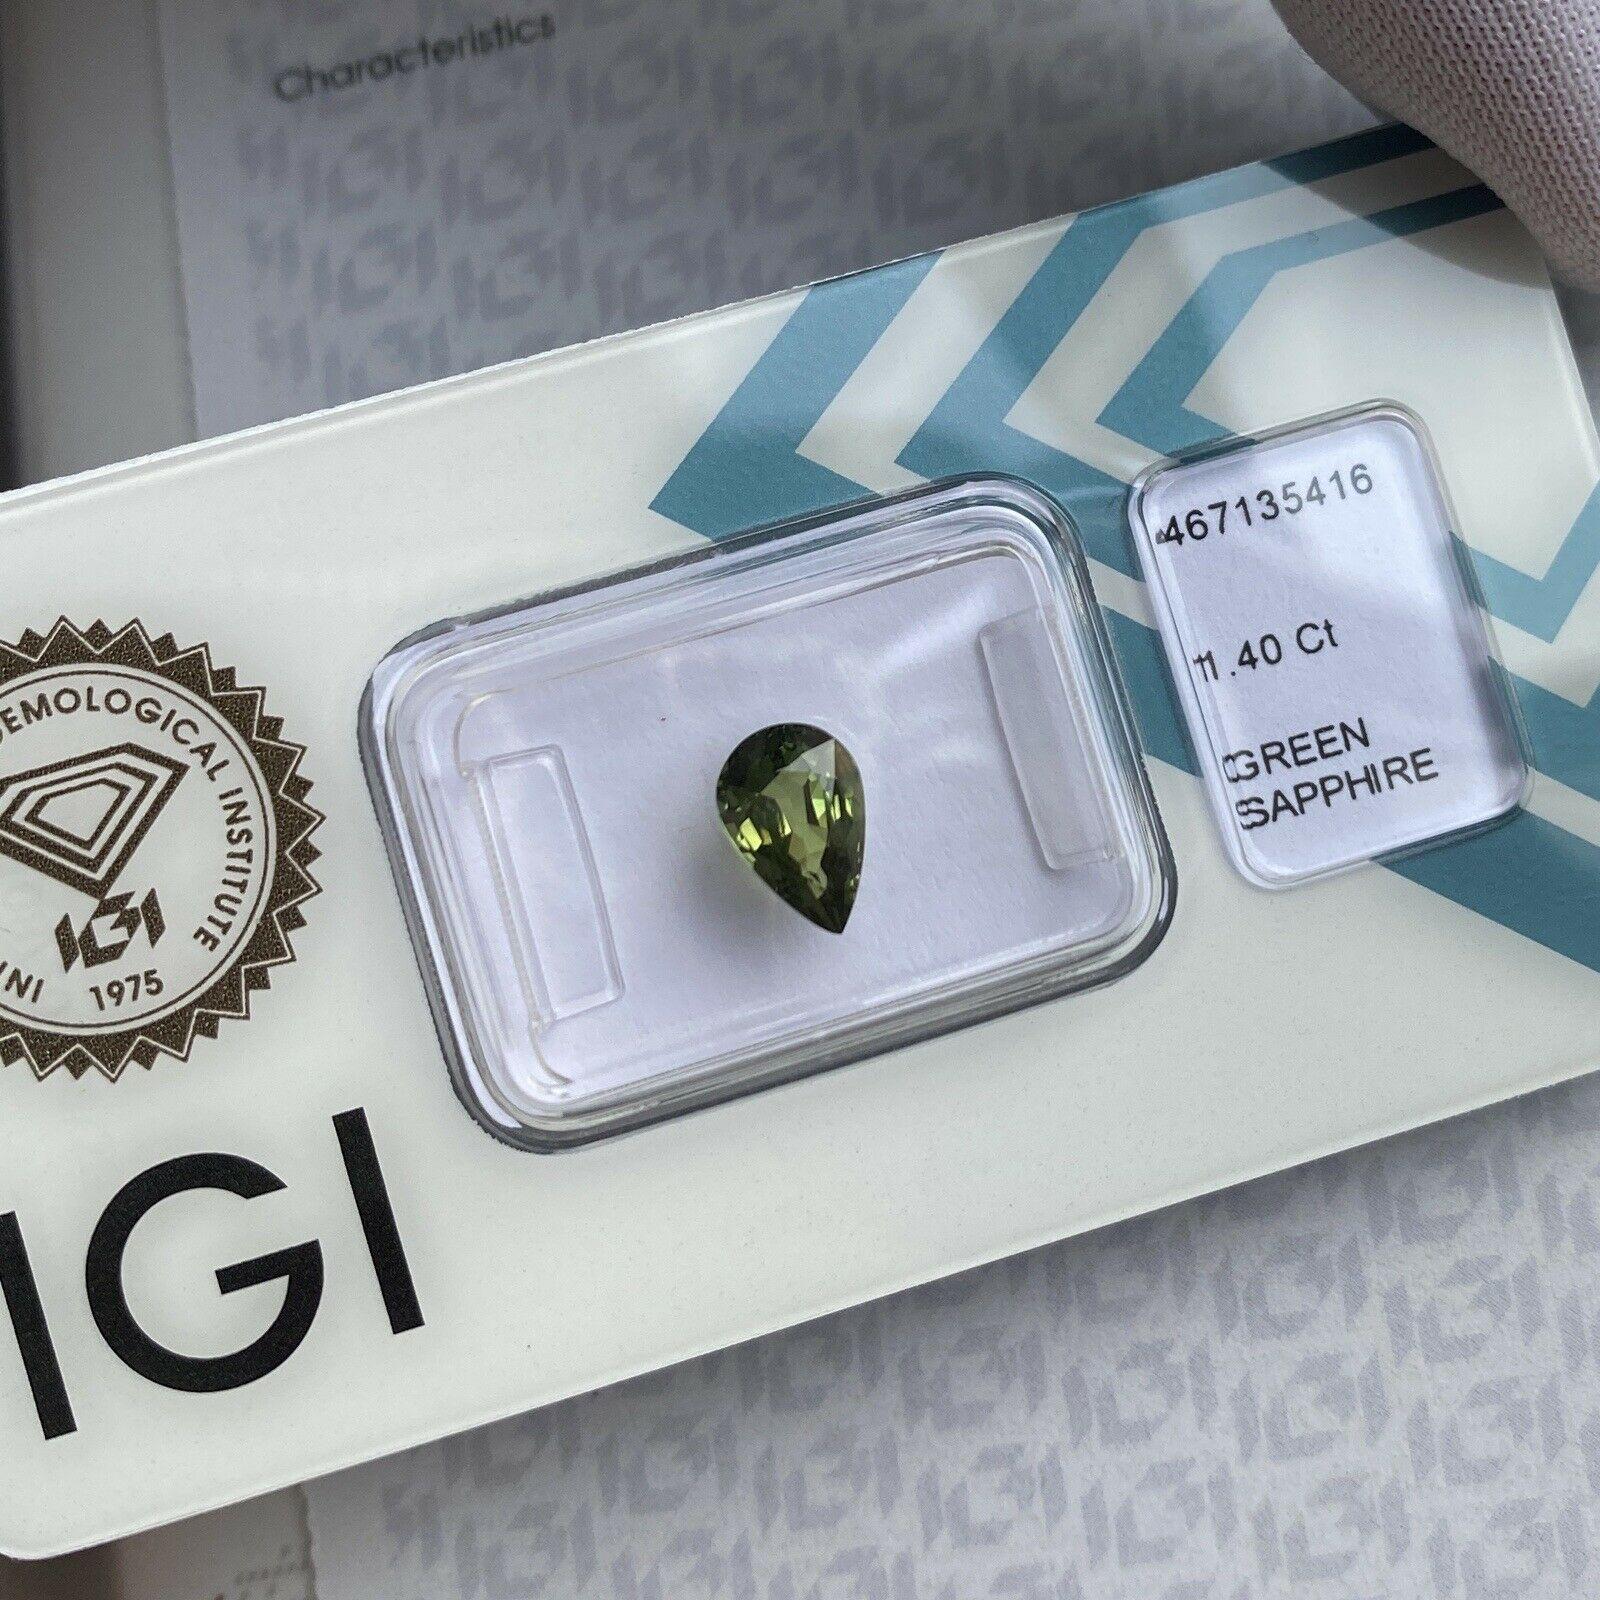 1.40ct Yellow Green Sapphire Rare IGI Certified Pear Teardrop Cut Gem Blister

Yellowish Green Sapphire In IGI Blister. 
1.40 Carat with an excellent pear teardrop cut and very good clarity, very clean stone with only some small natural inclusions